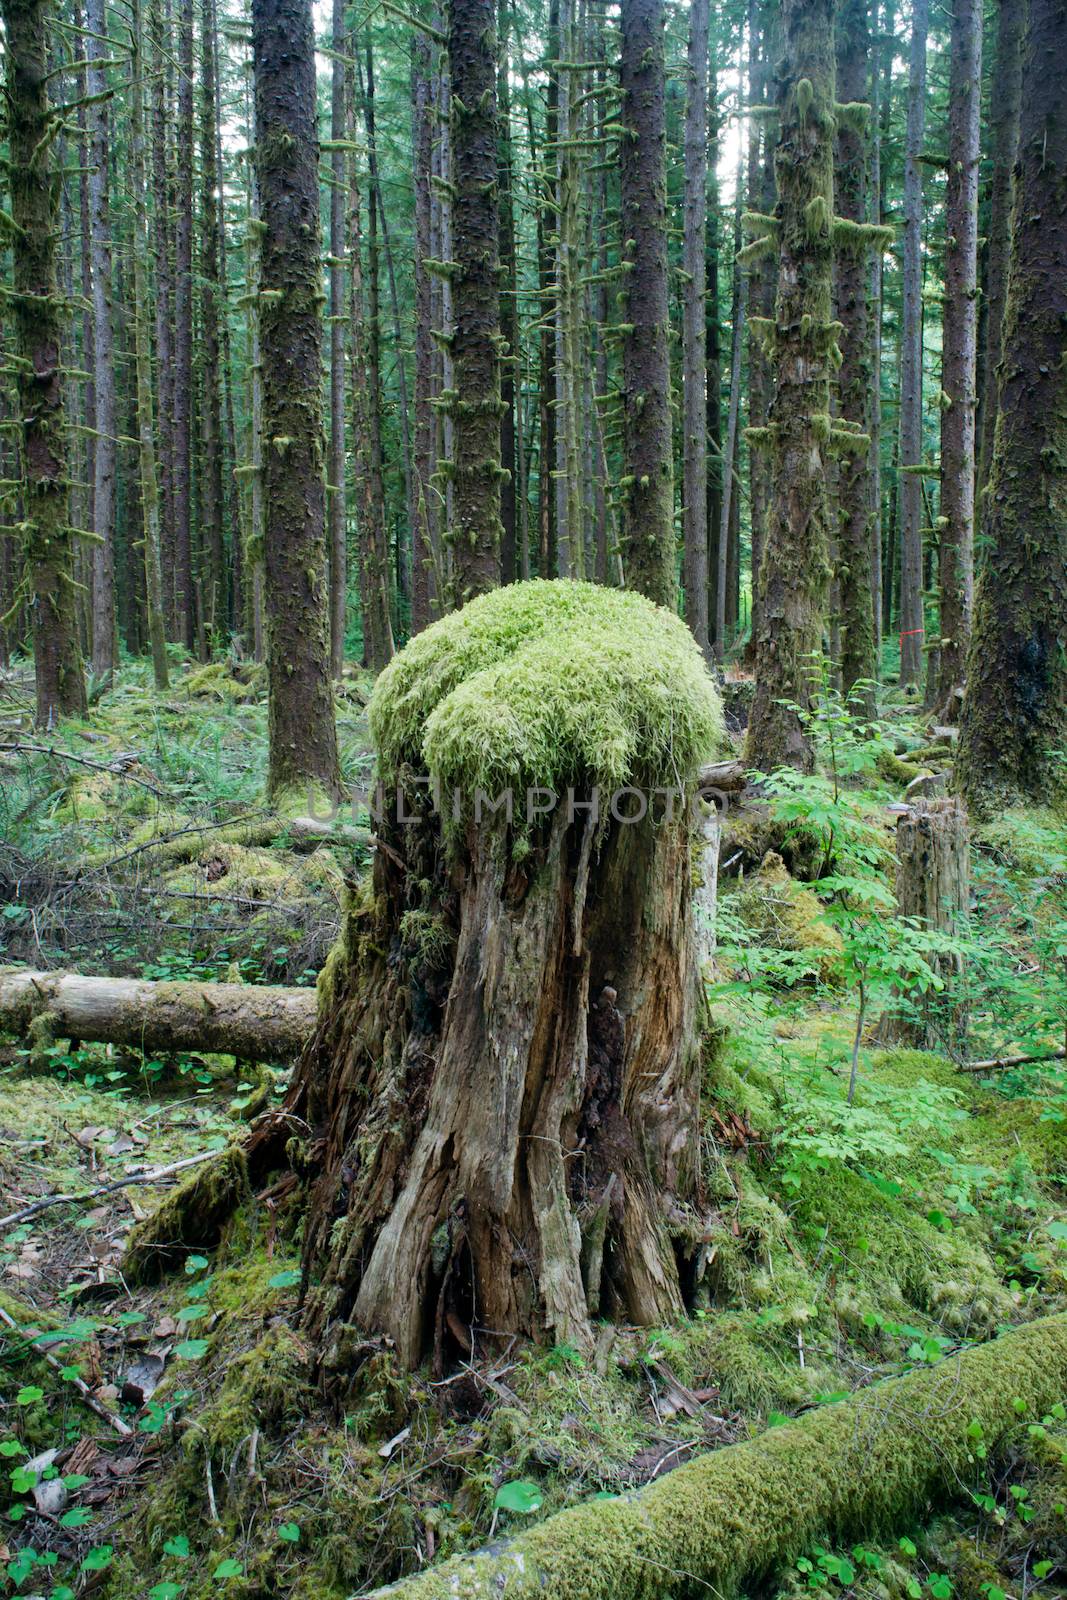 Rainforest Old Stump Death Brings New Growth Life by ChrisBoswell